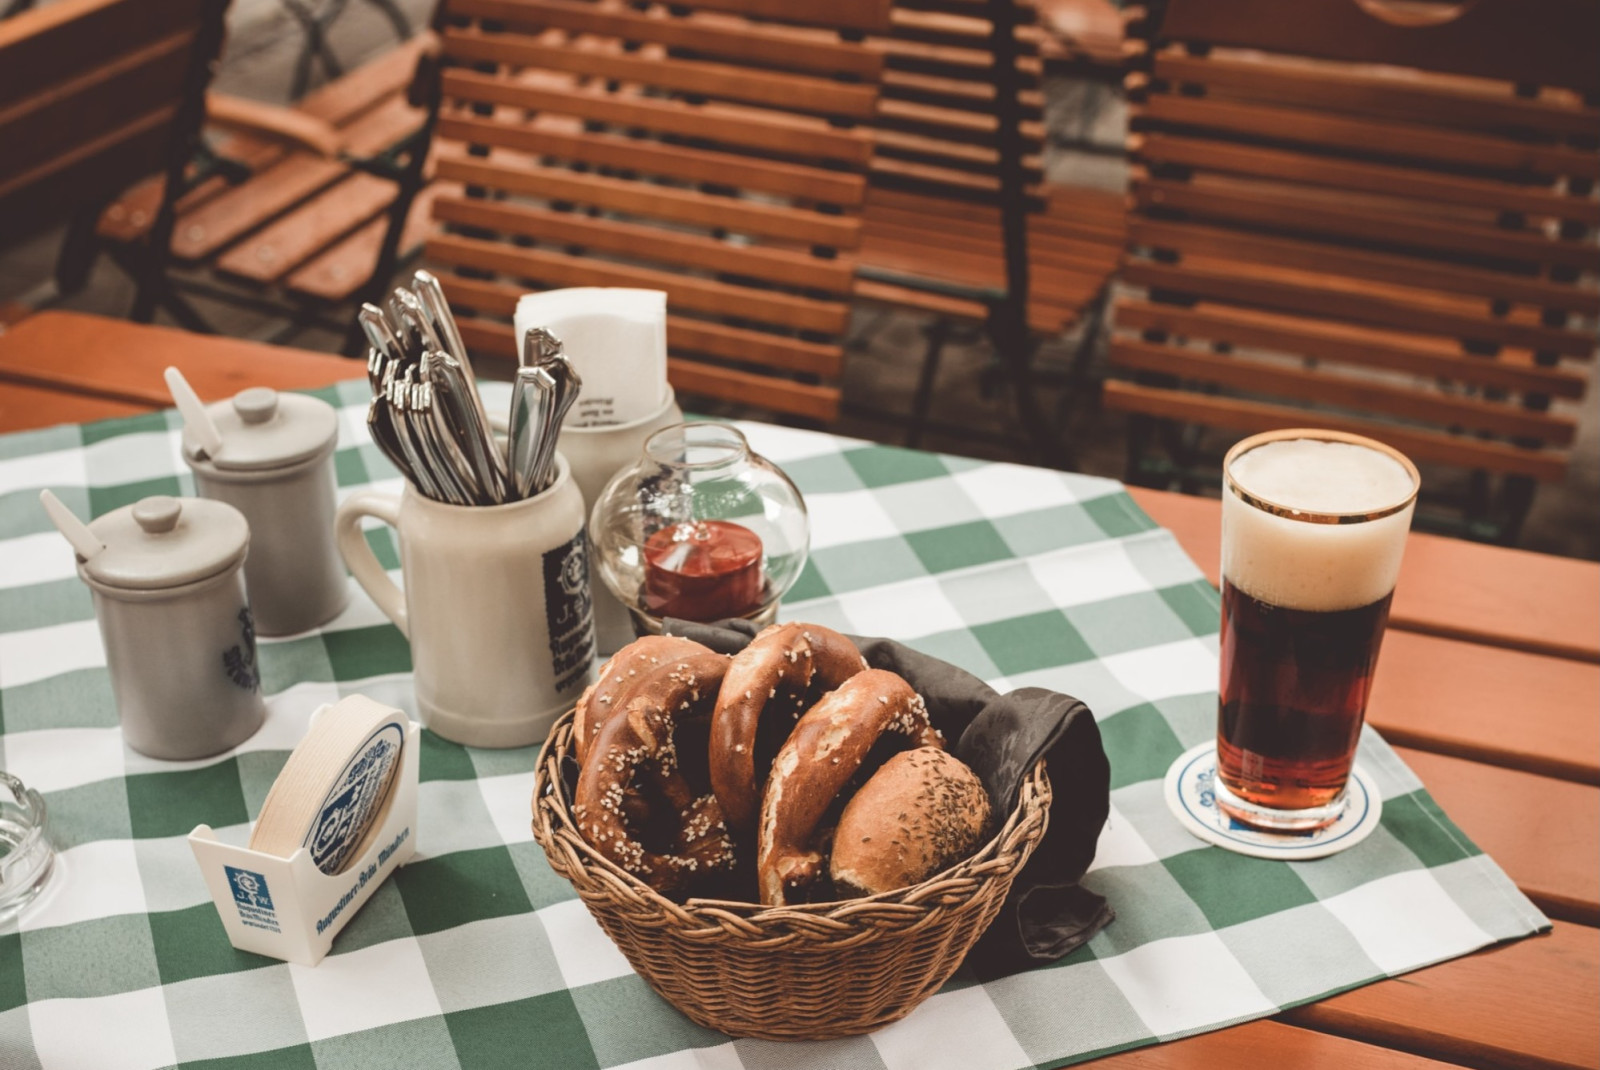 Pastries in basket with beer and silverware on plaid table cloth on picnic table.